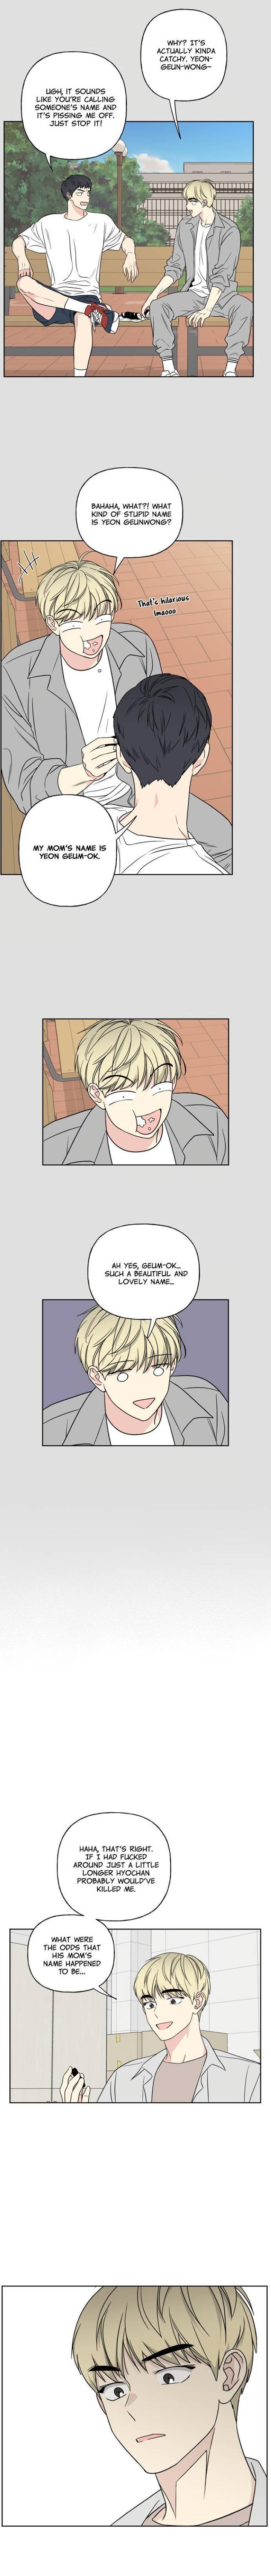 mother-im-sorry-chap-21-4